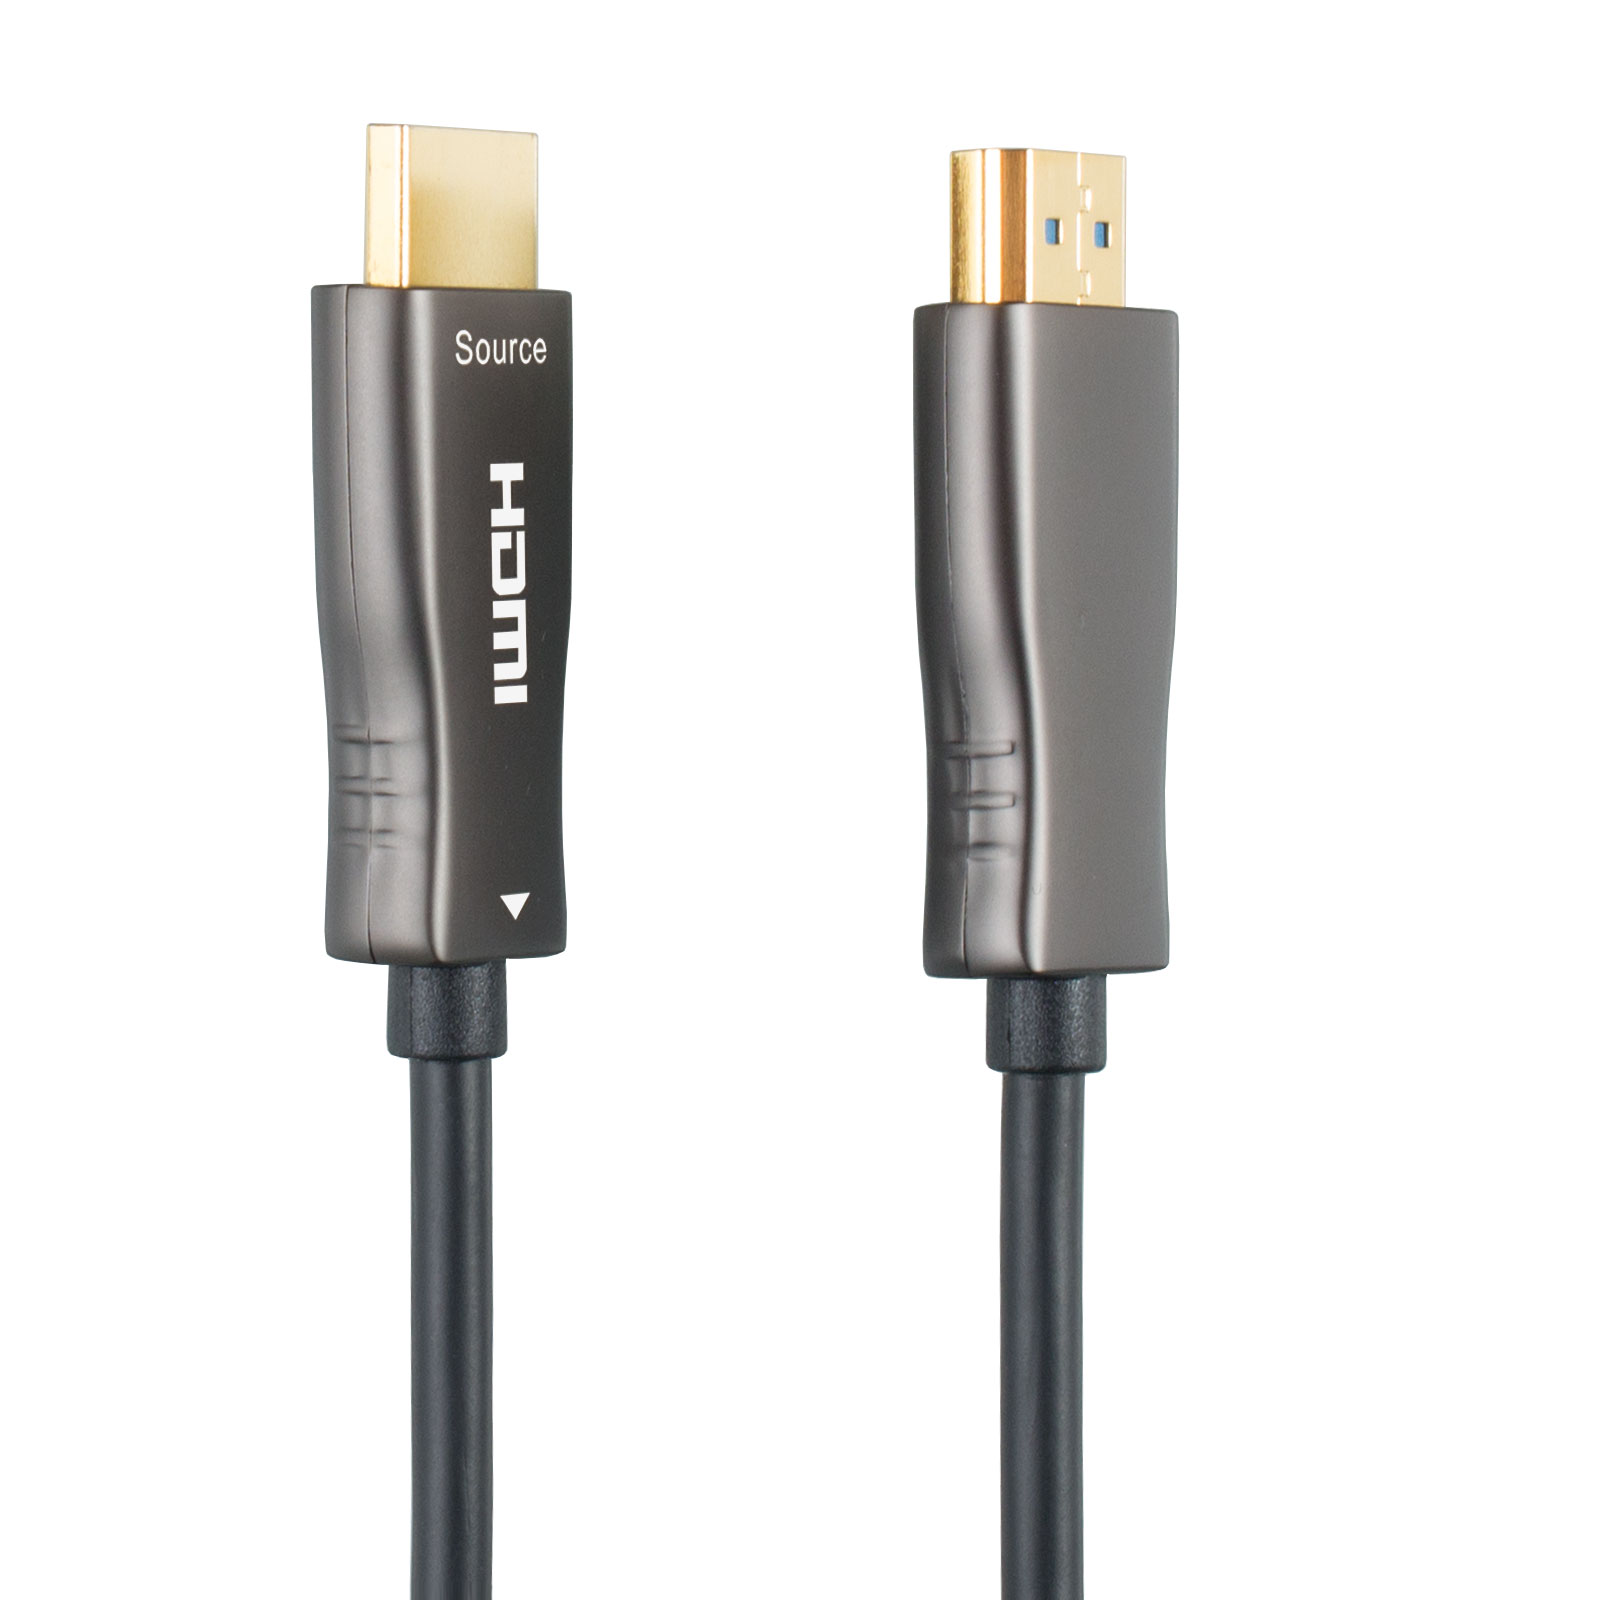 4K Active optical HDMI cable